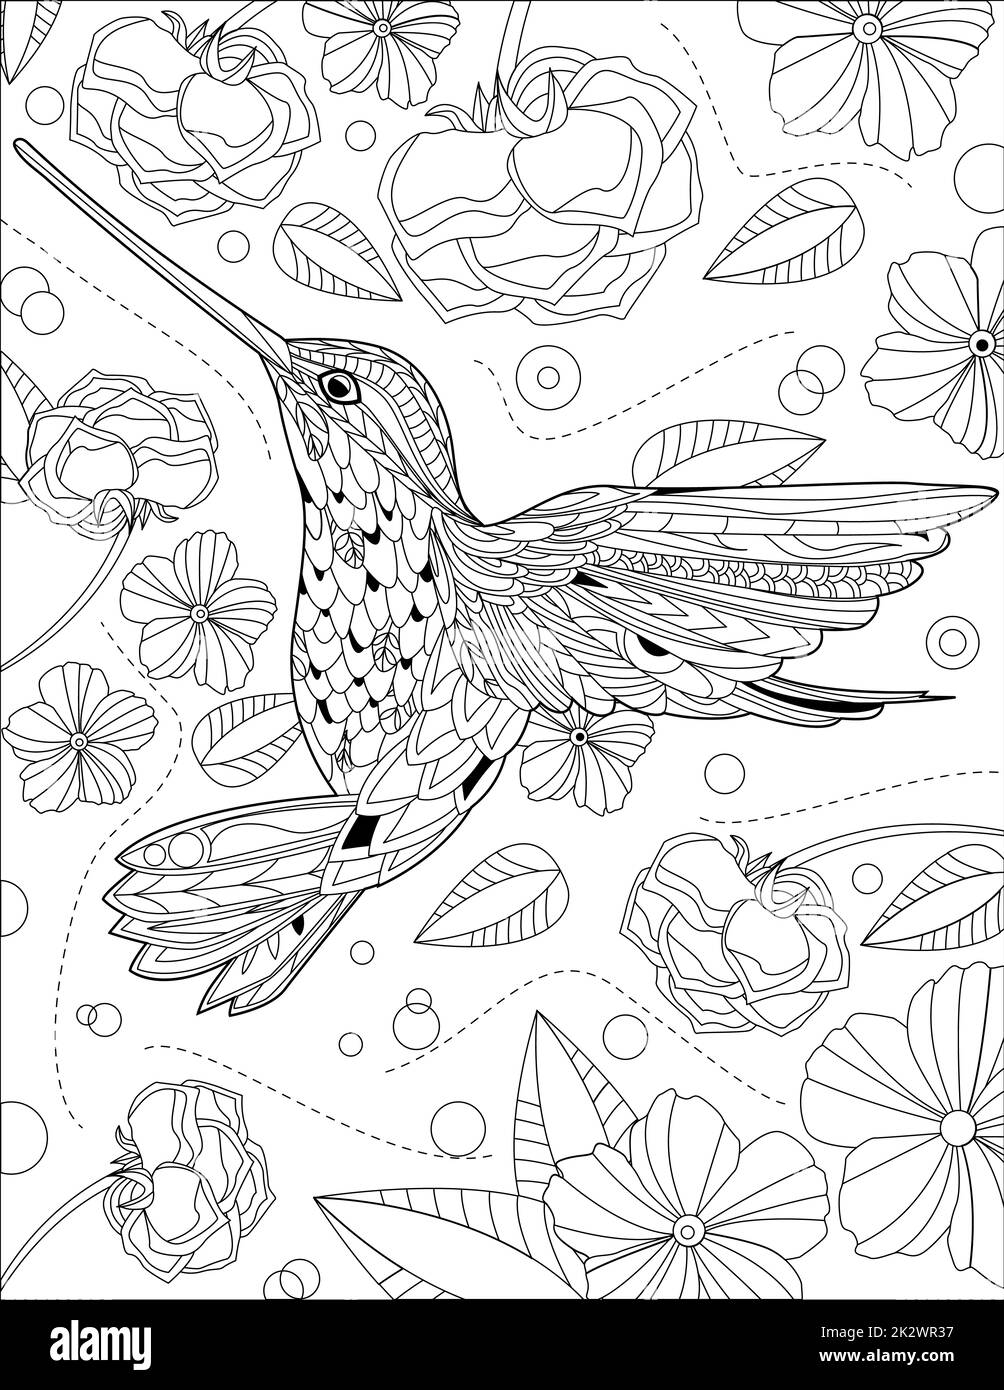 Hummingbird Eating Flower Syrup with Flowers and Roses Ennding Line Drawing coloriage Book Banque D'Images